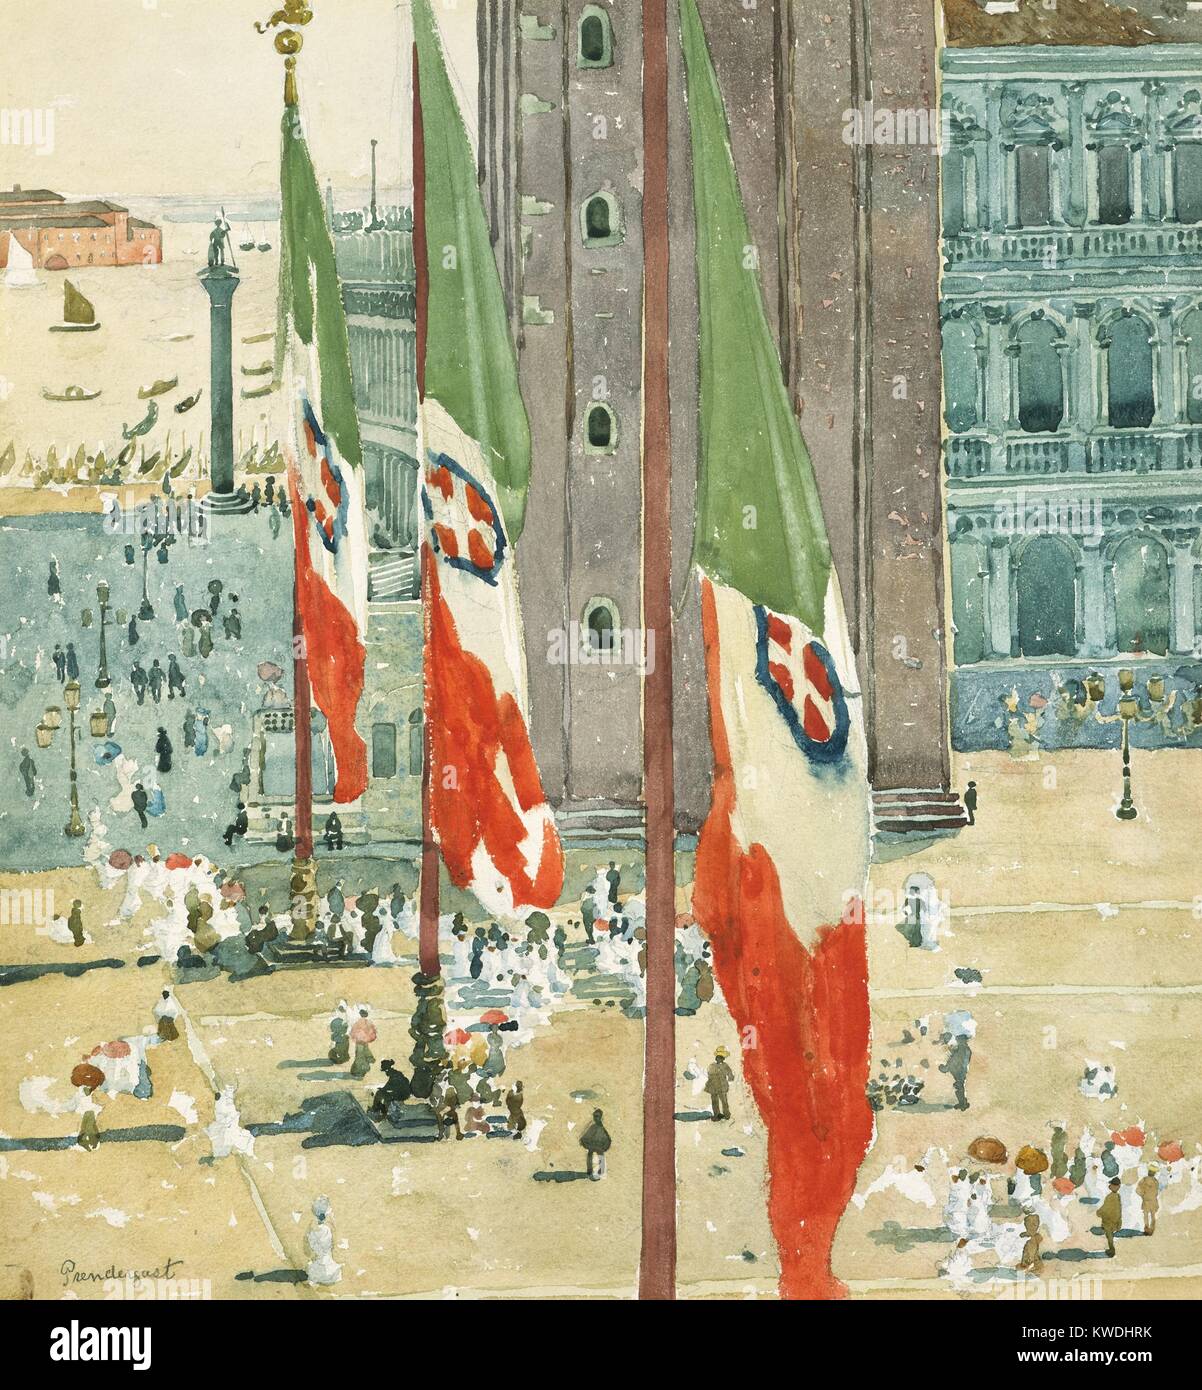 PIAZZA DI SAN MARCO, by Maurice Brazil Prendergast, 1898-99, American painting, watercolor. Flags dominate the scene, that recedes into the Venetian lagoon, with the St. Marks Square below (BSLOC 2017 7 147) Stock Photo